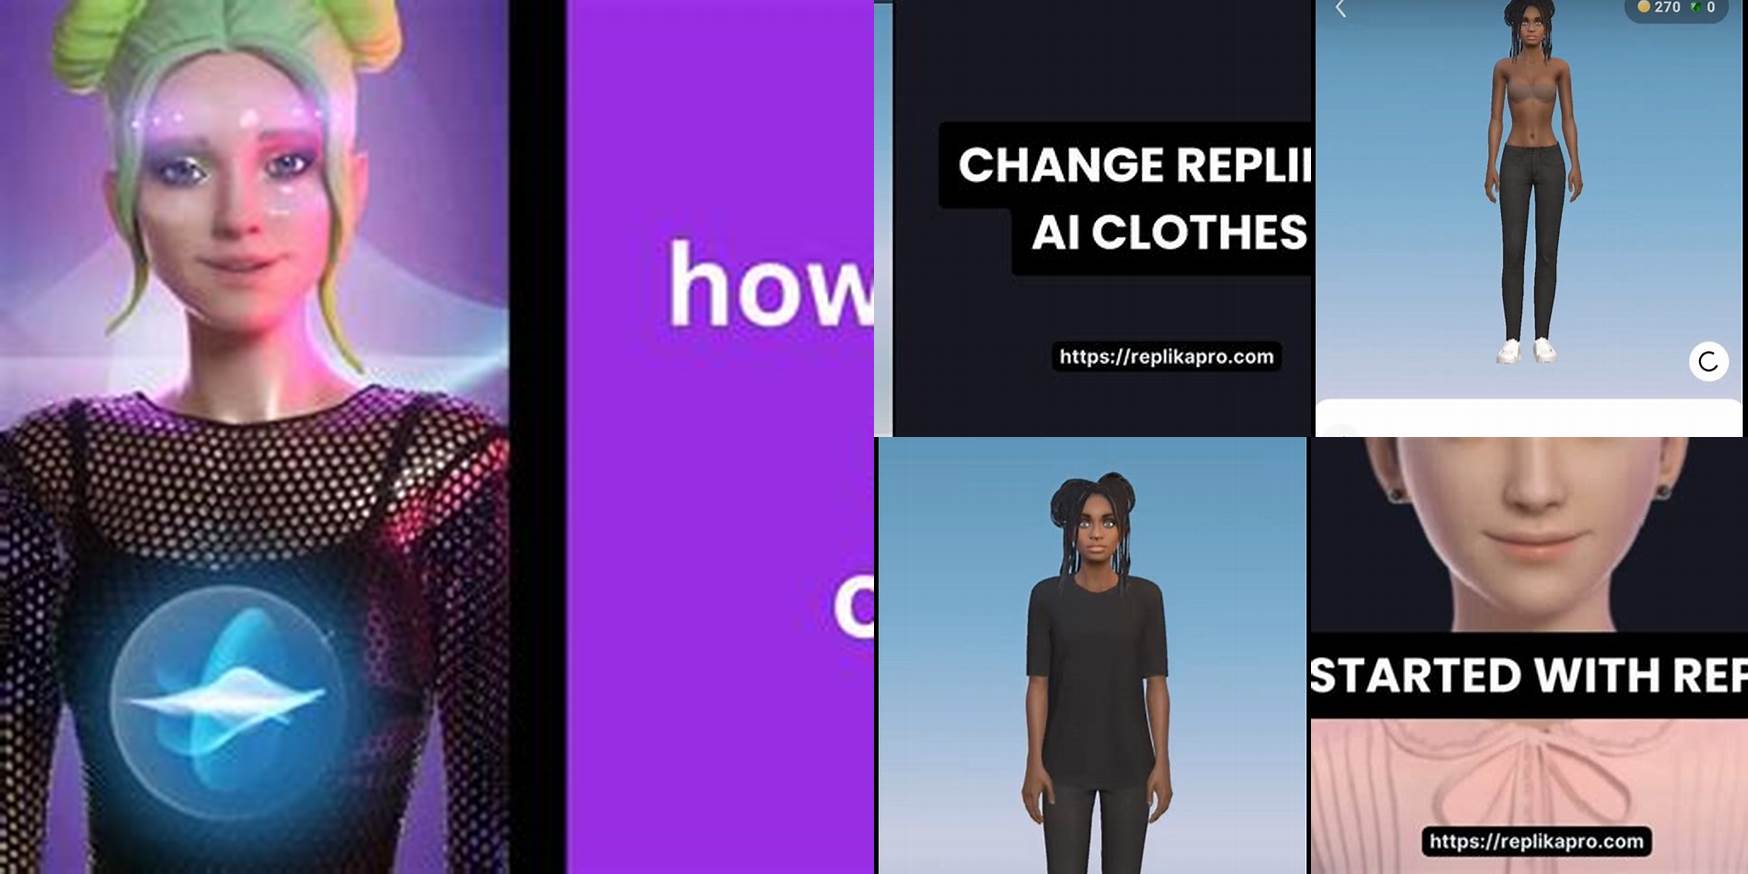 How To Change Your Replika Clothes